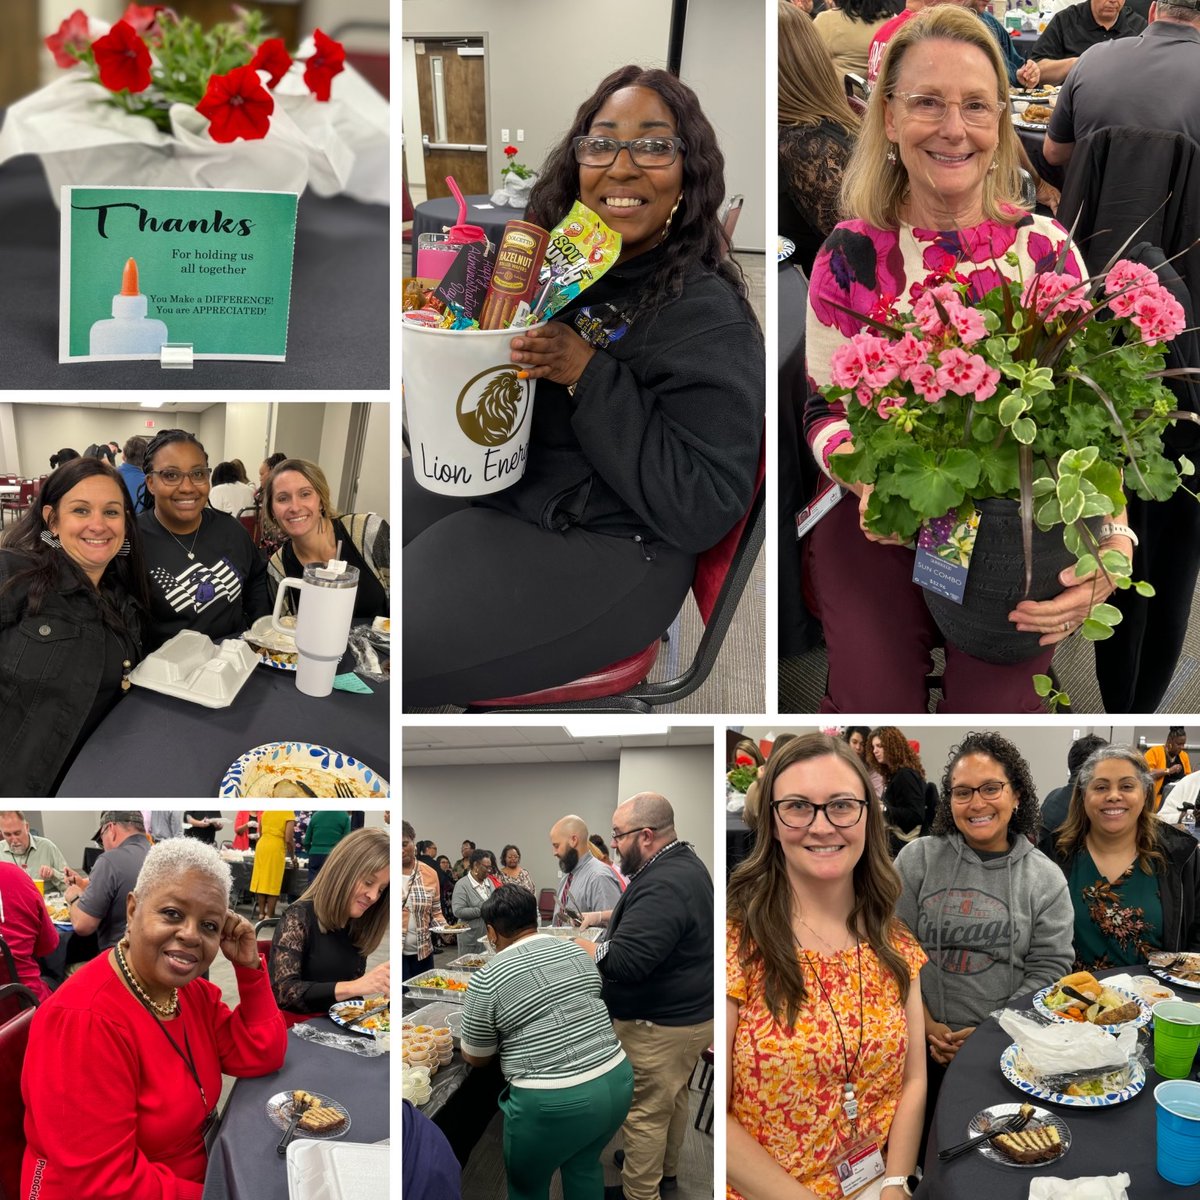 Happy Administrative Professionals Day & we’re proud to say that we have some of the BEST! We hope you felt the love & appreciation during our district administrative luncheon on Monday. Thank you for keeping things running smoothly & being the backbone of our district. #TeamHoke